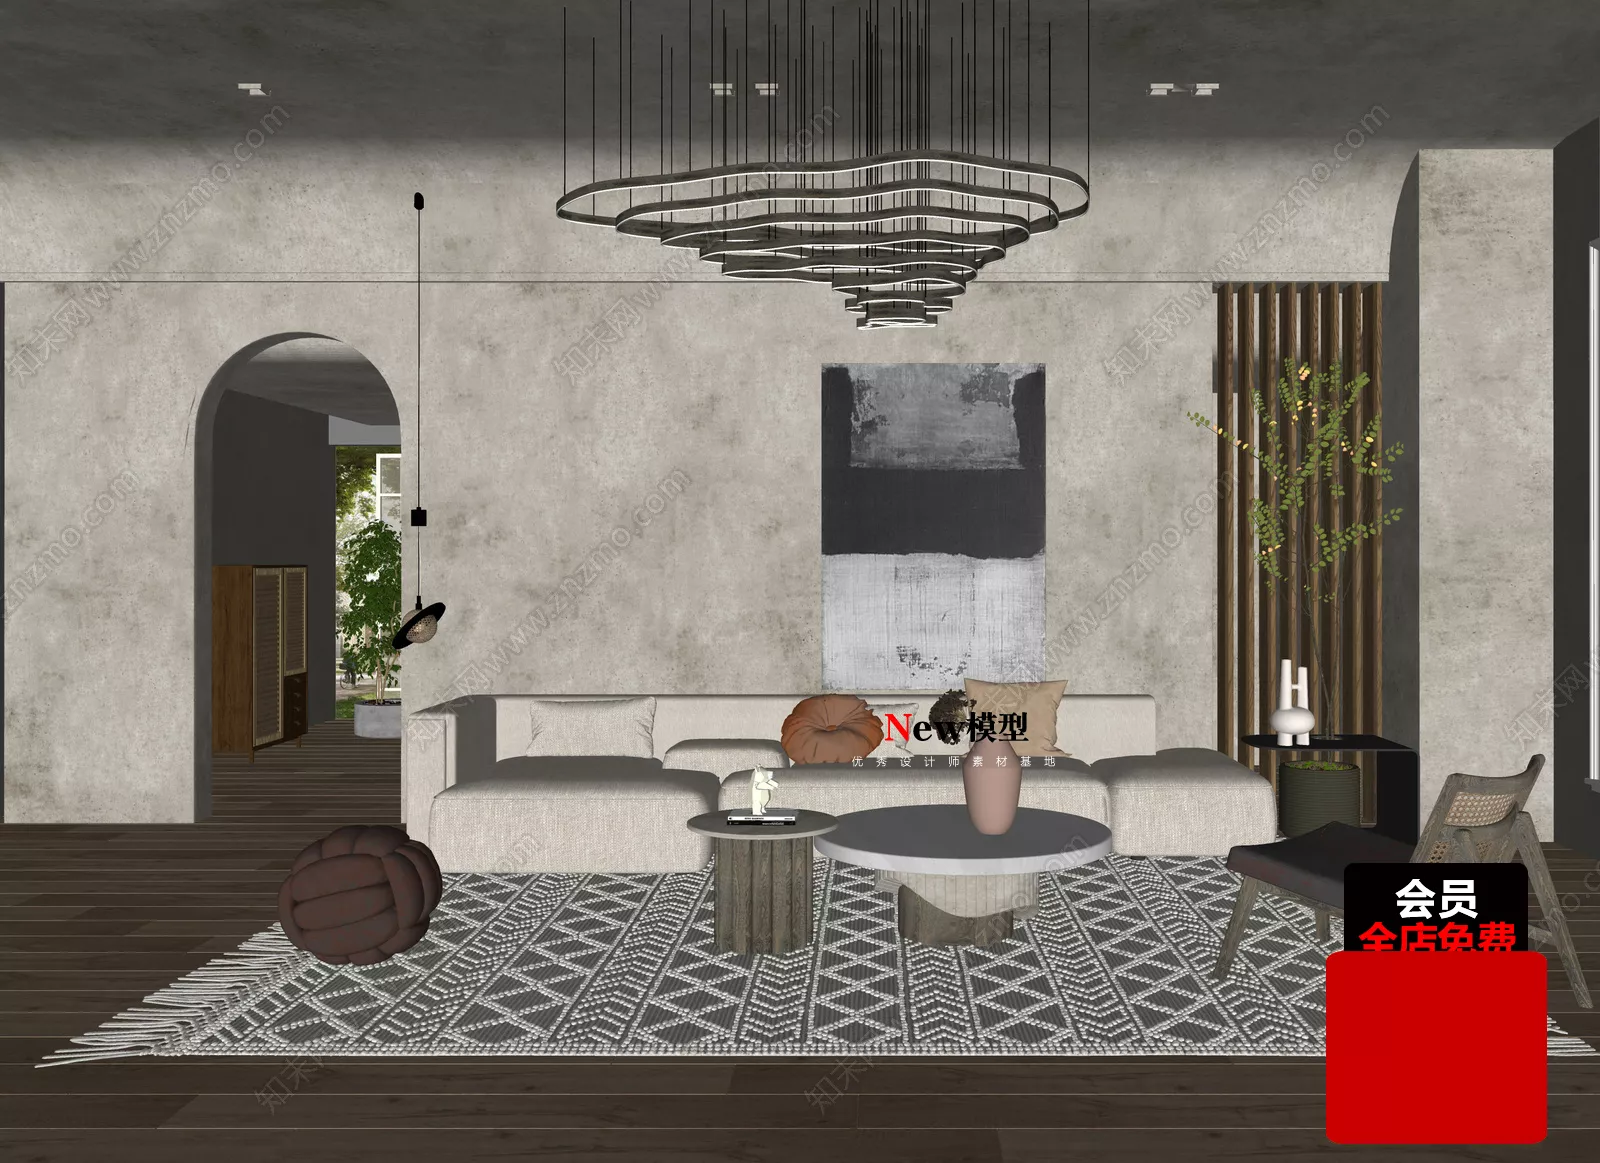 WABI SABI INTERIOR COLLECTION - SKETCHUP 3D SCENE - VRAY OR ENSCAPE - ID17750